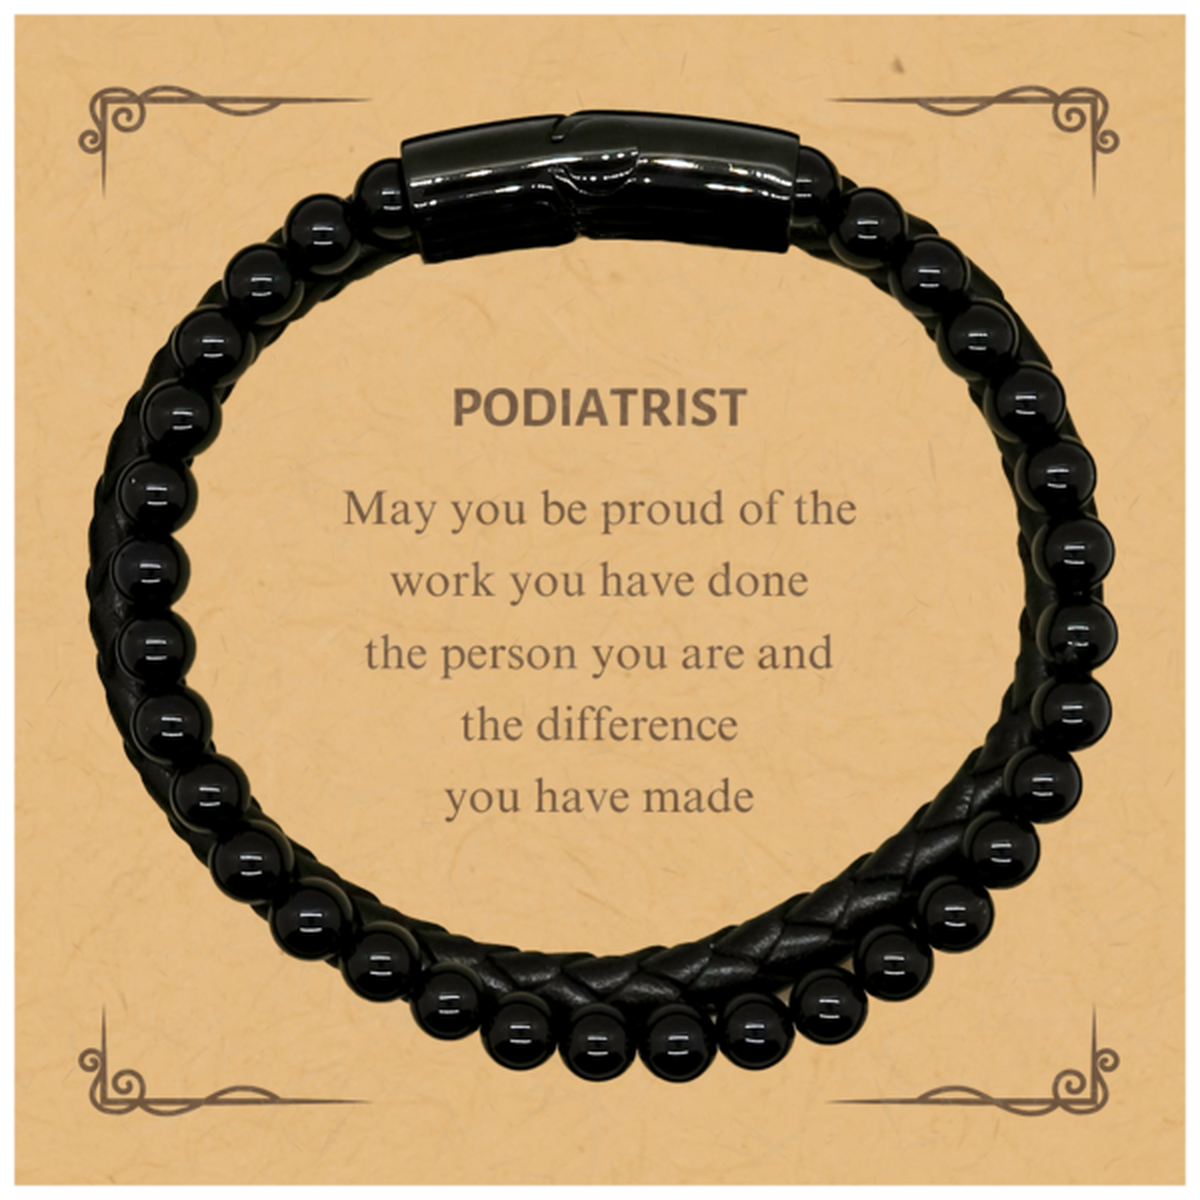 Podiatrist May you be proud of the work you have done, Retirement Podiatrist Stone Leather Bracelets for Colleague Appreciation Gifts Amazing for Podiatrist